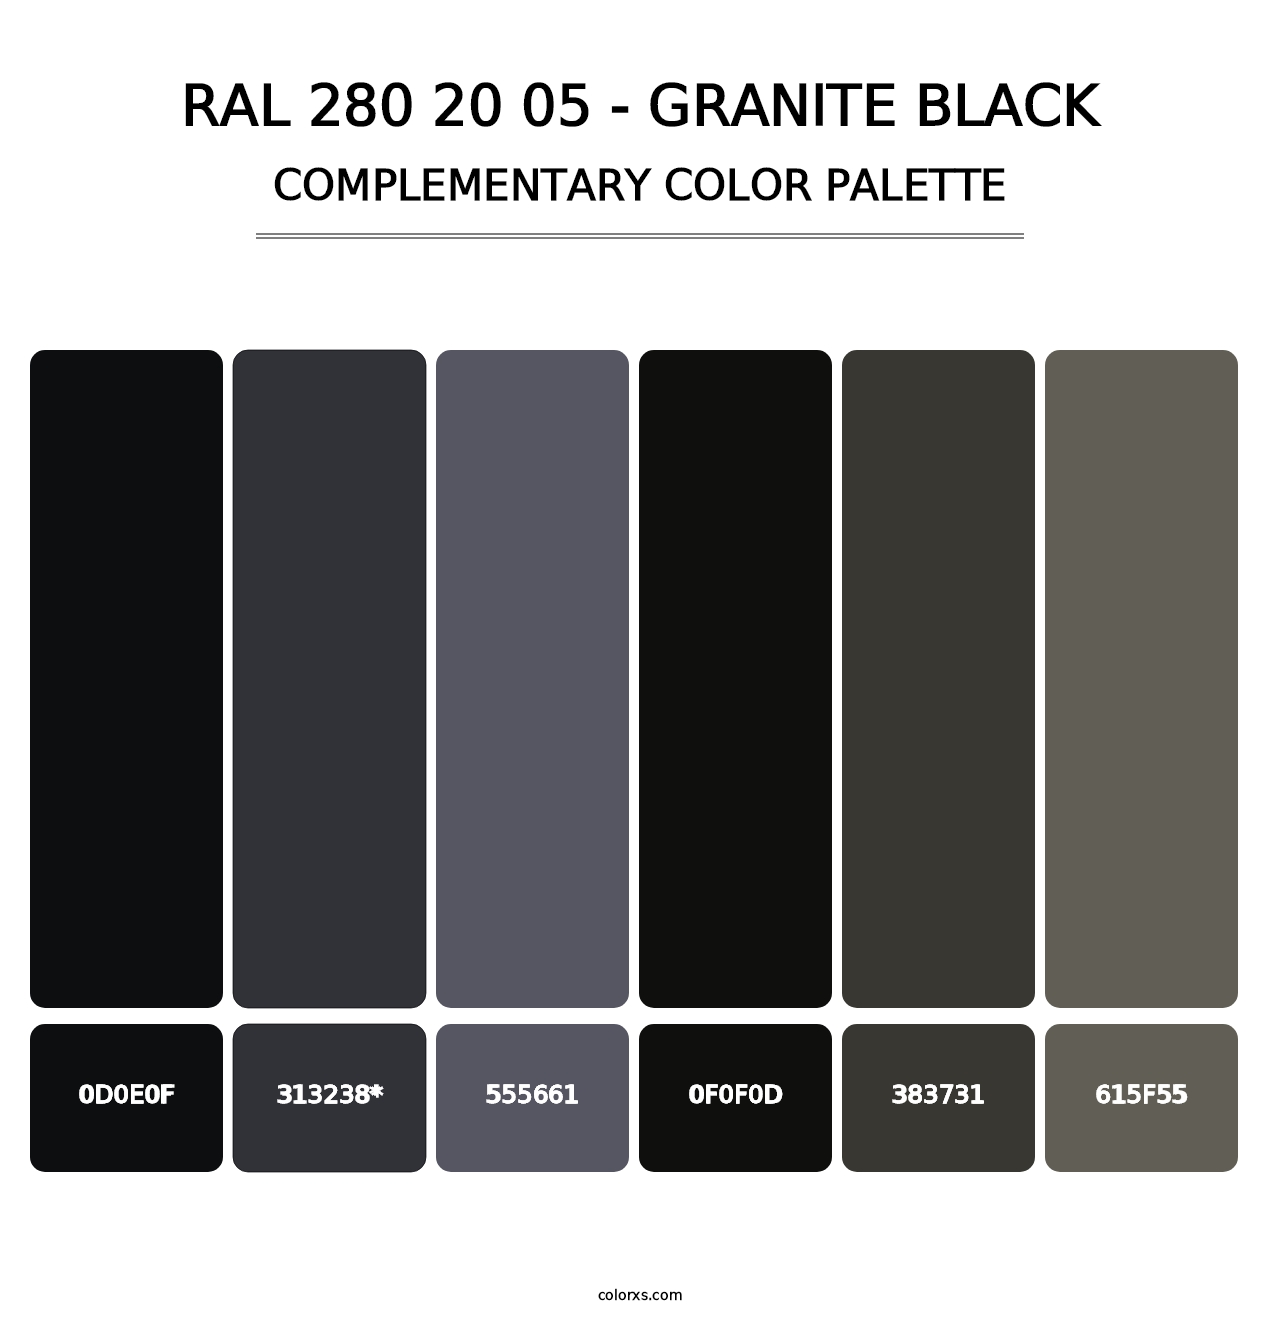 RAL 280 20 05 - Granite Black - Complementary Color Palette